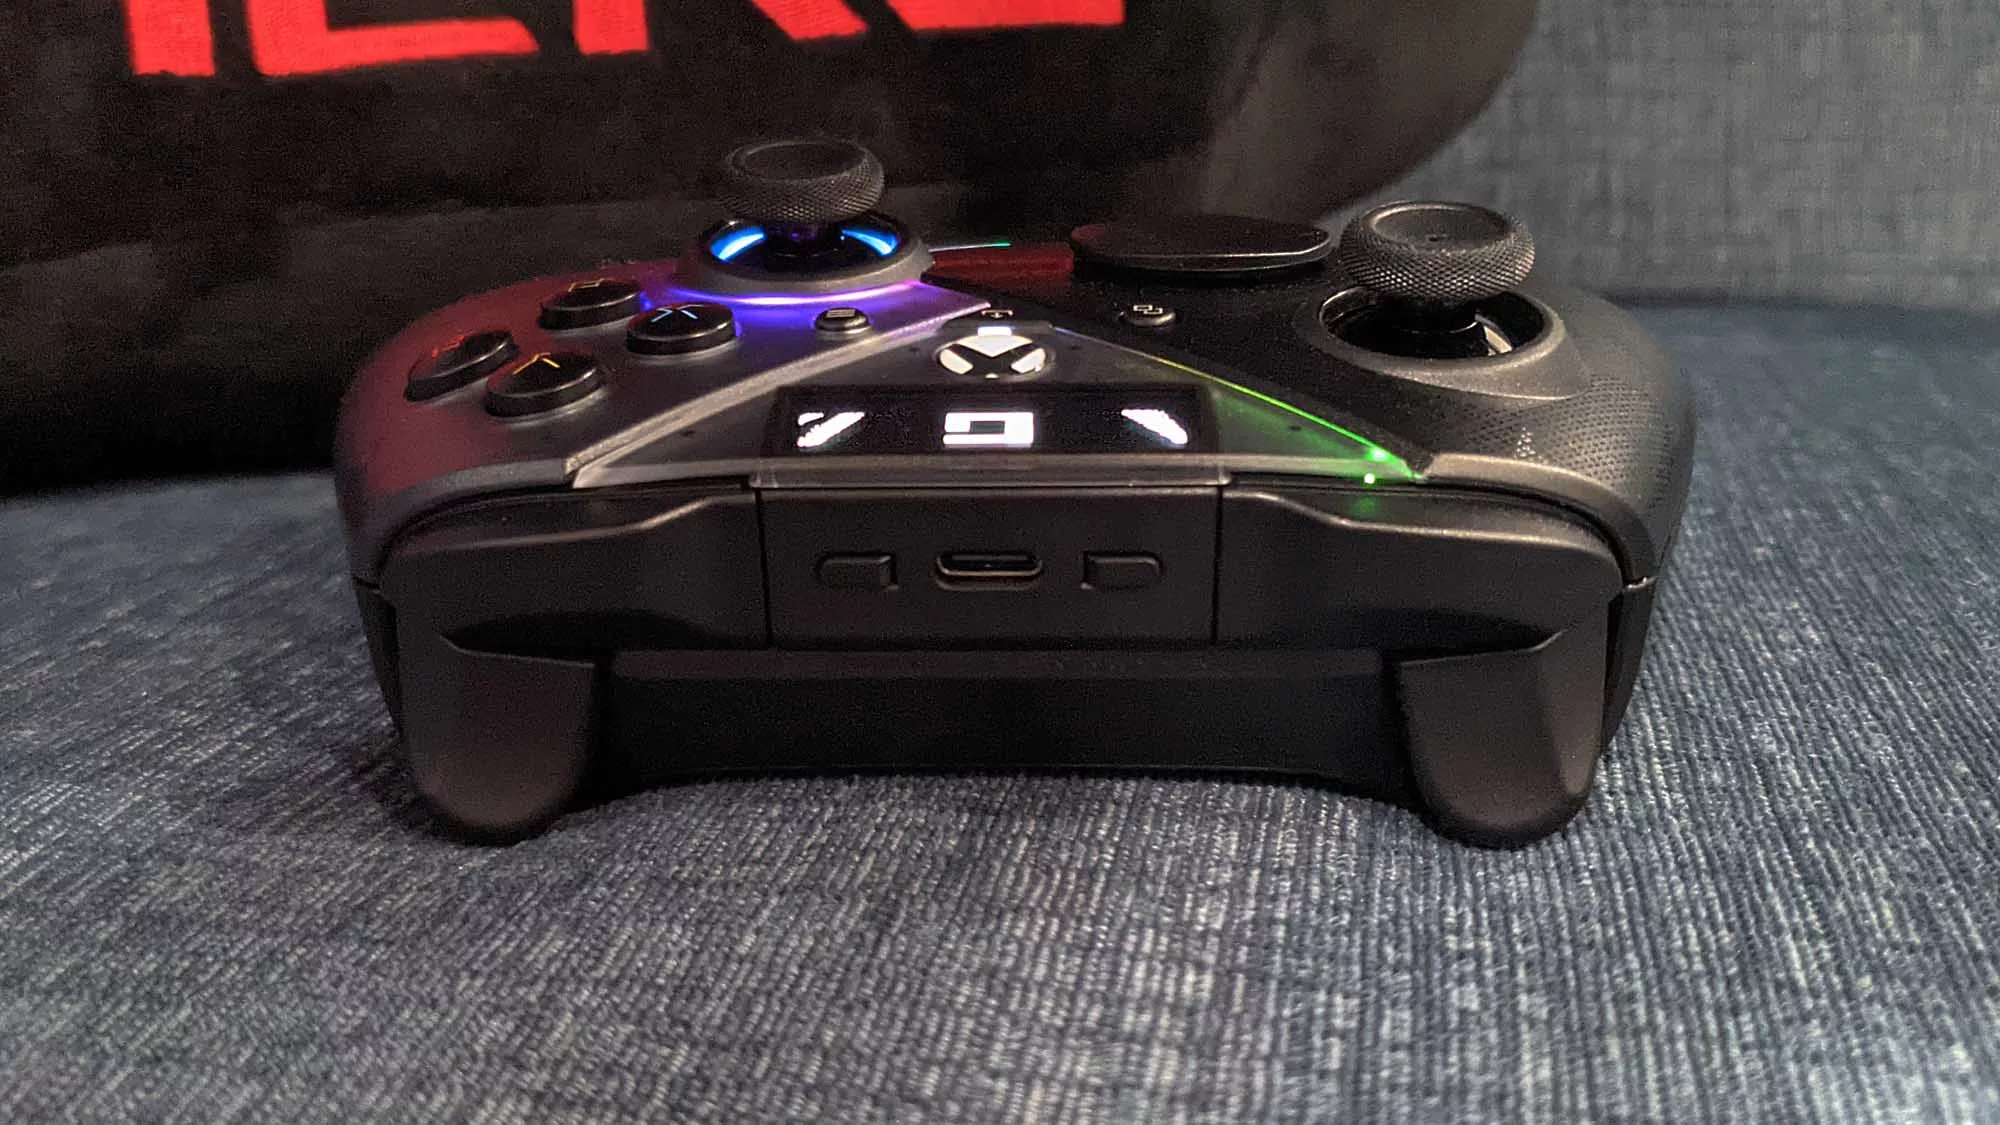 Top view of the ROG Raikiri Pro controller on a couch.